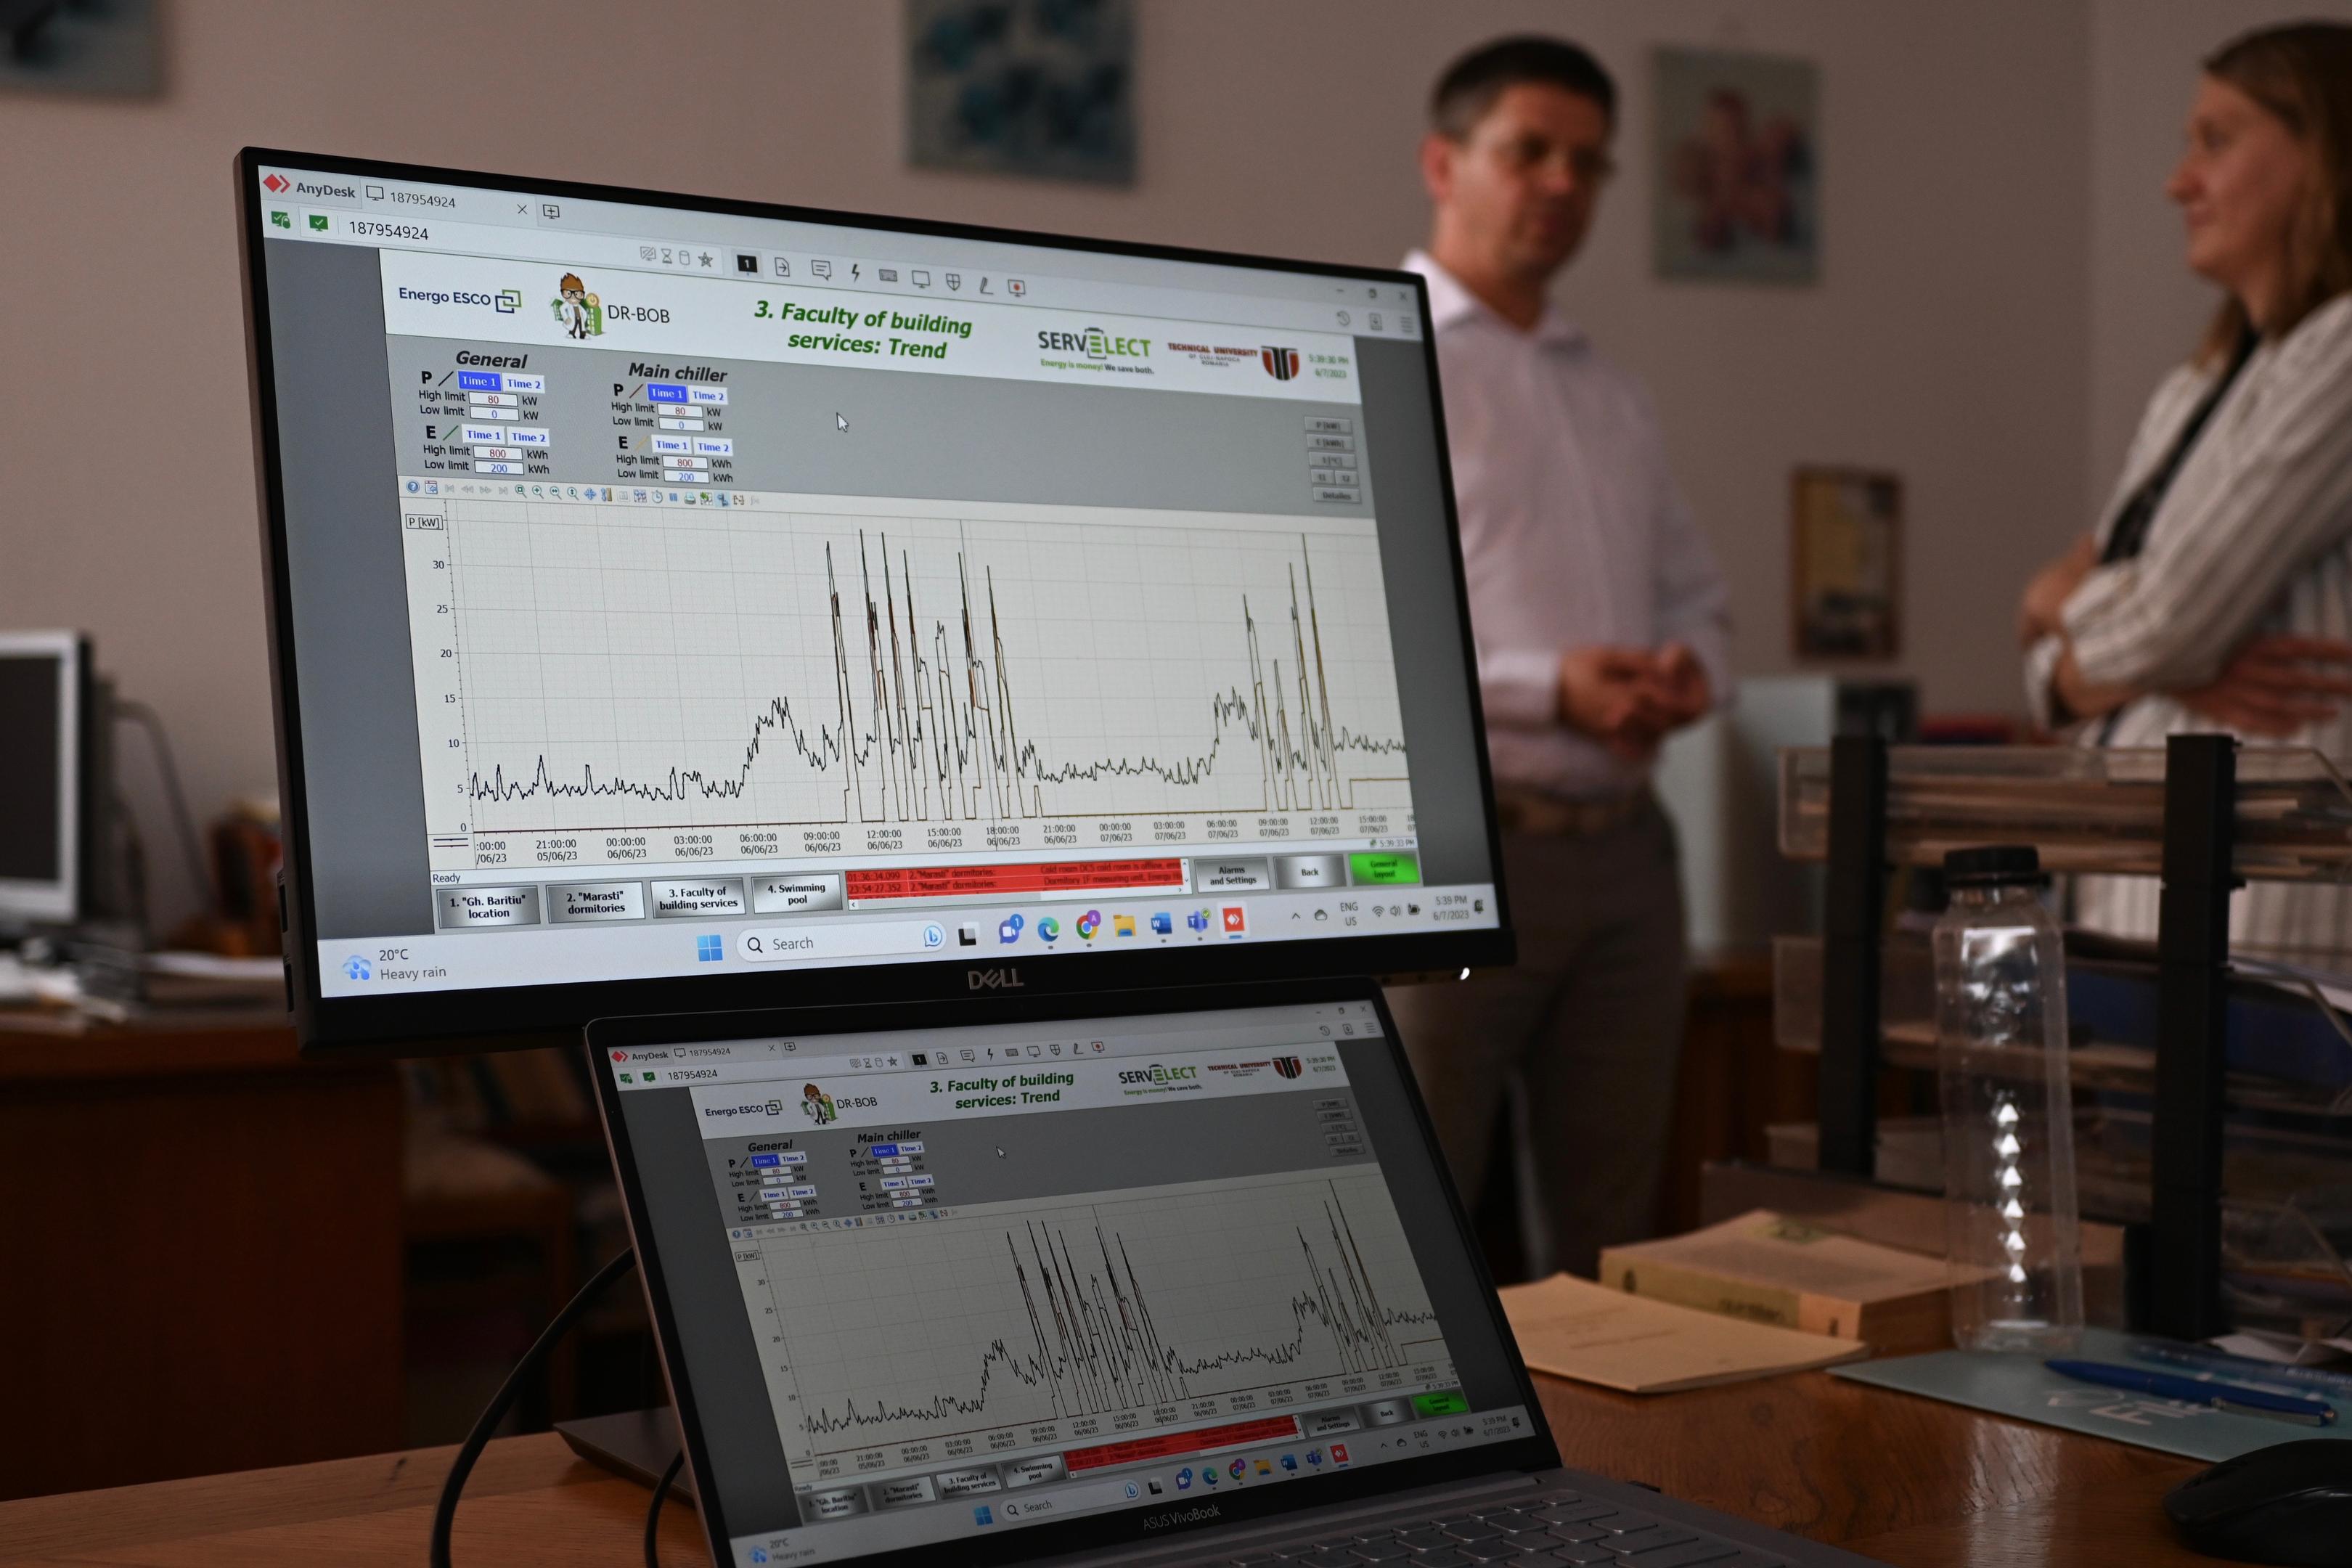 – In Cluj the researchers can already monitor the energy in some of the buildings, but through Do it smarter they also want to be able to interfere and control the energy consumption.